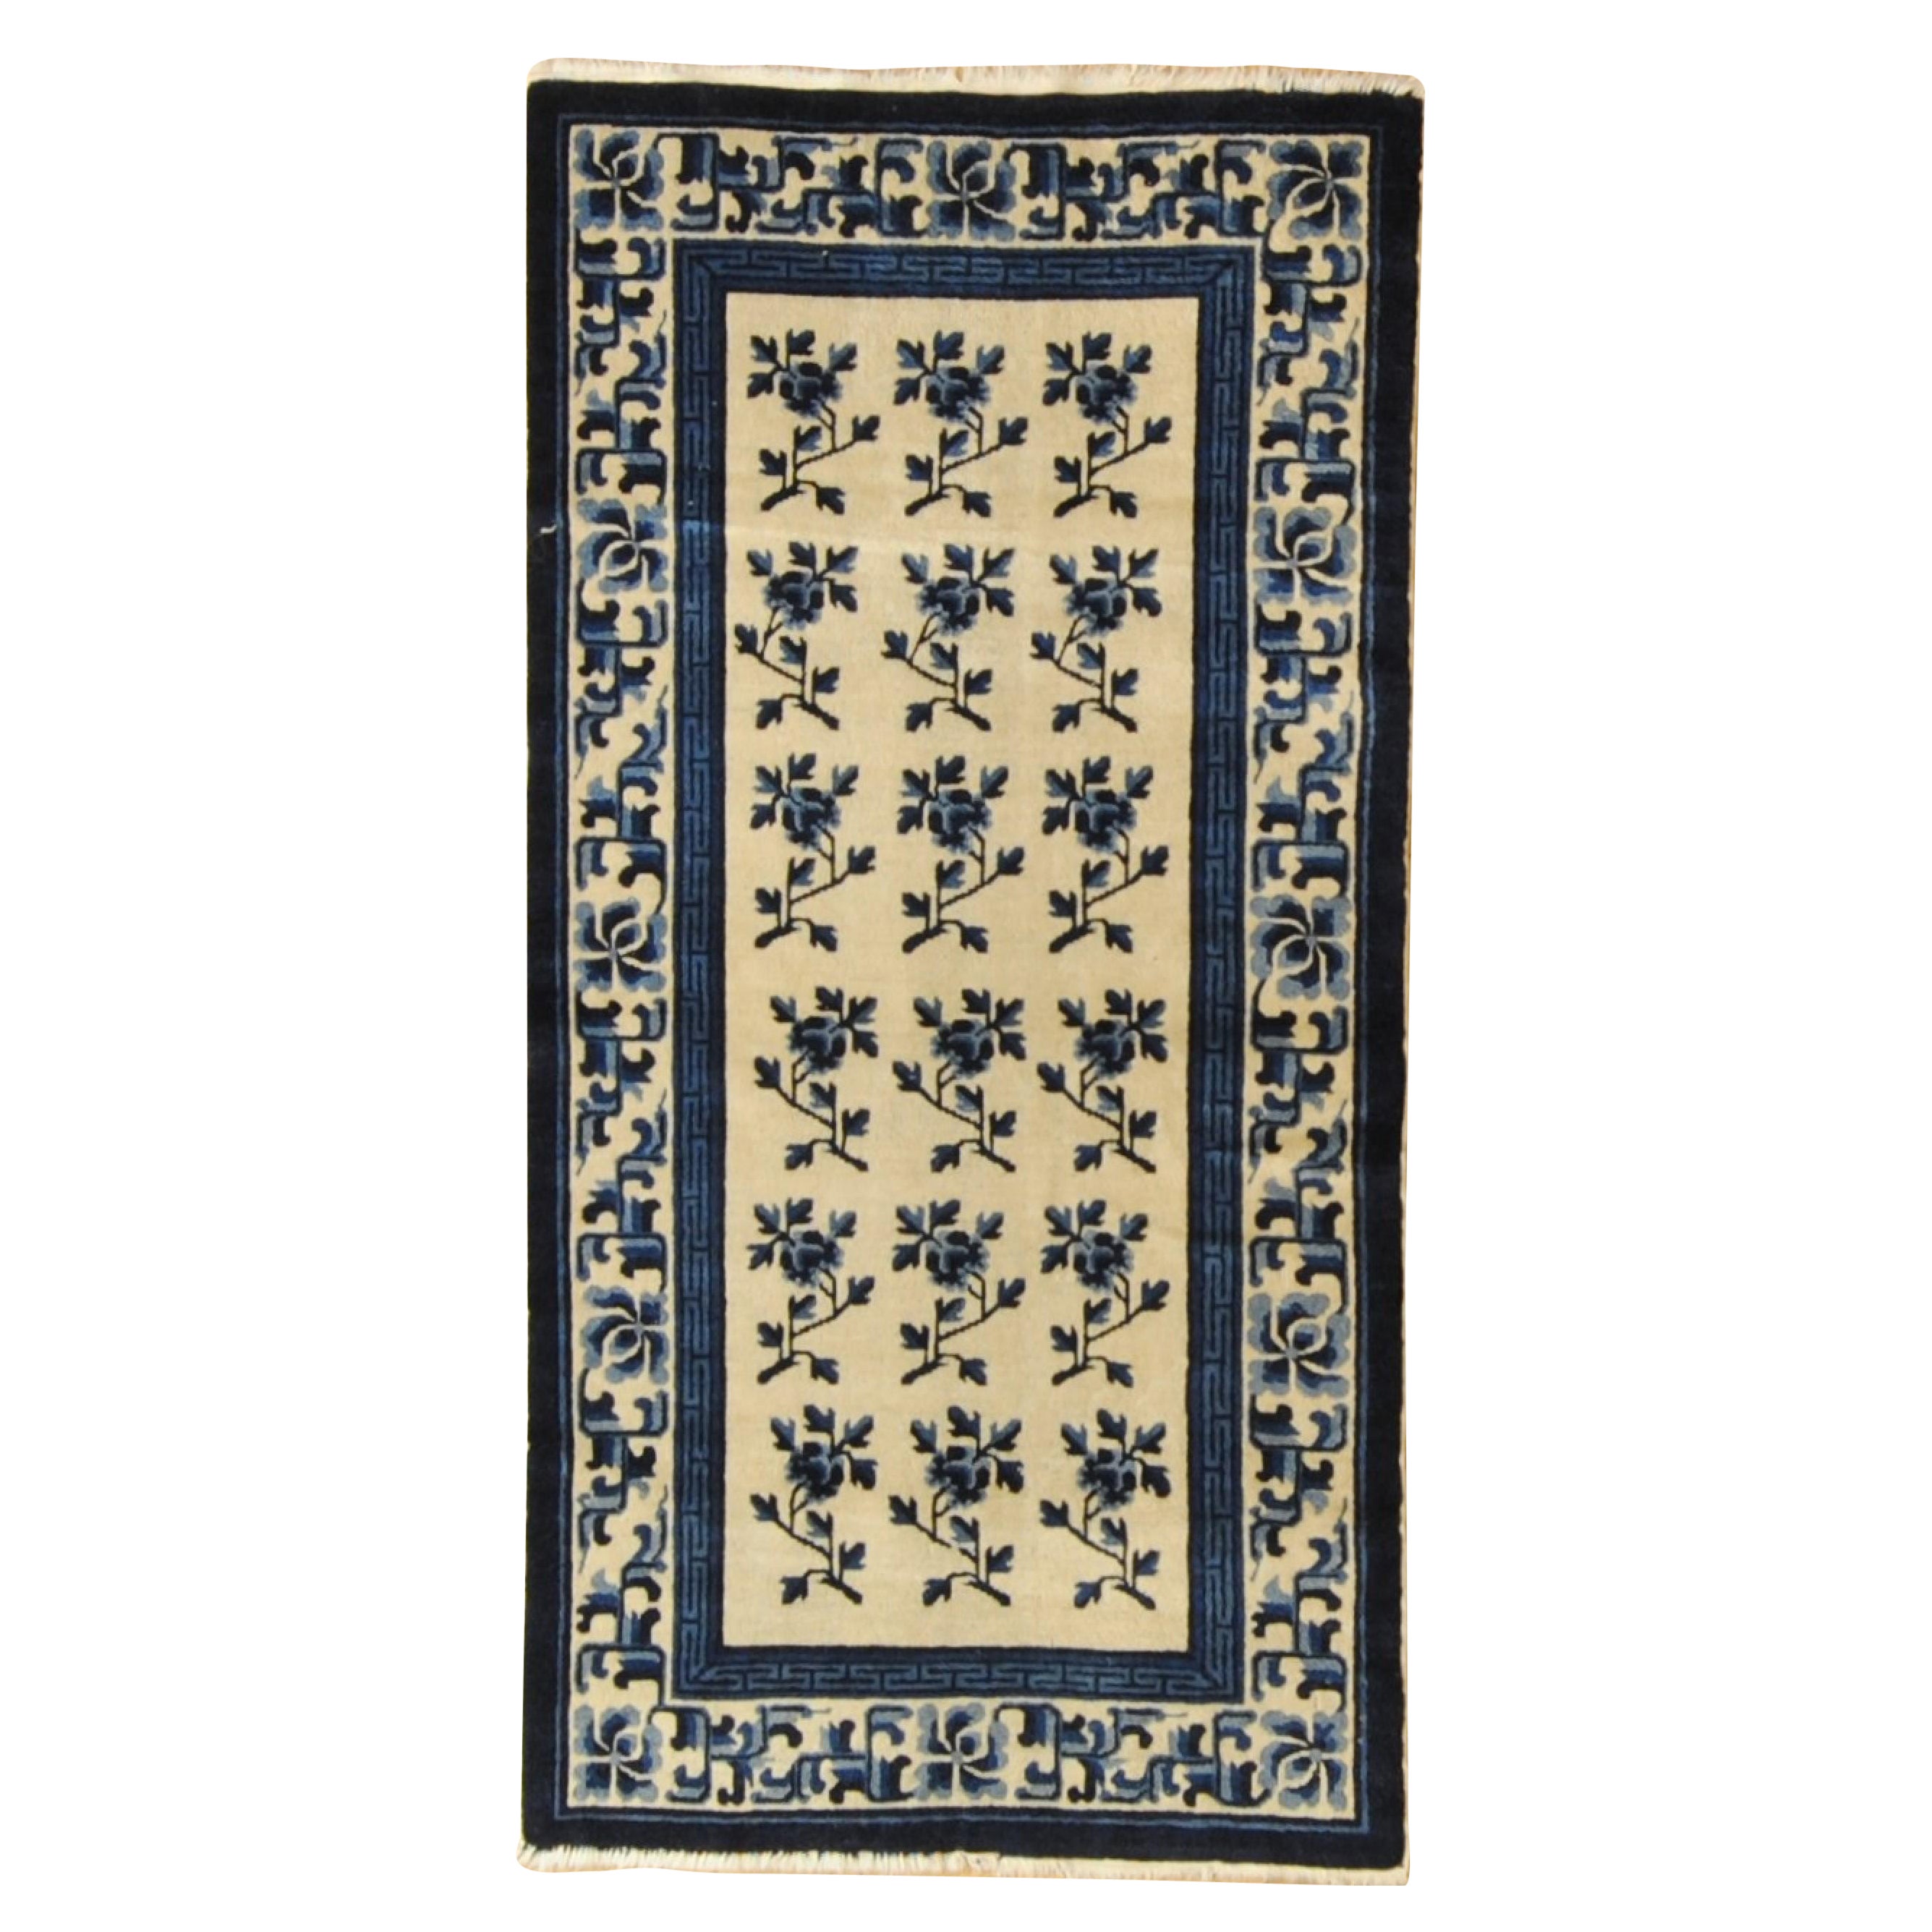 20th Century Blue and White Floreal Peking Chinese Handmade Rug, ca 1930 For Sale